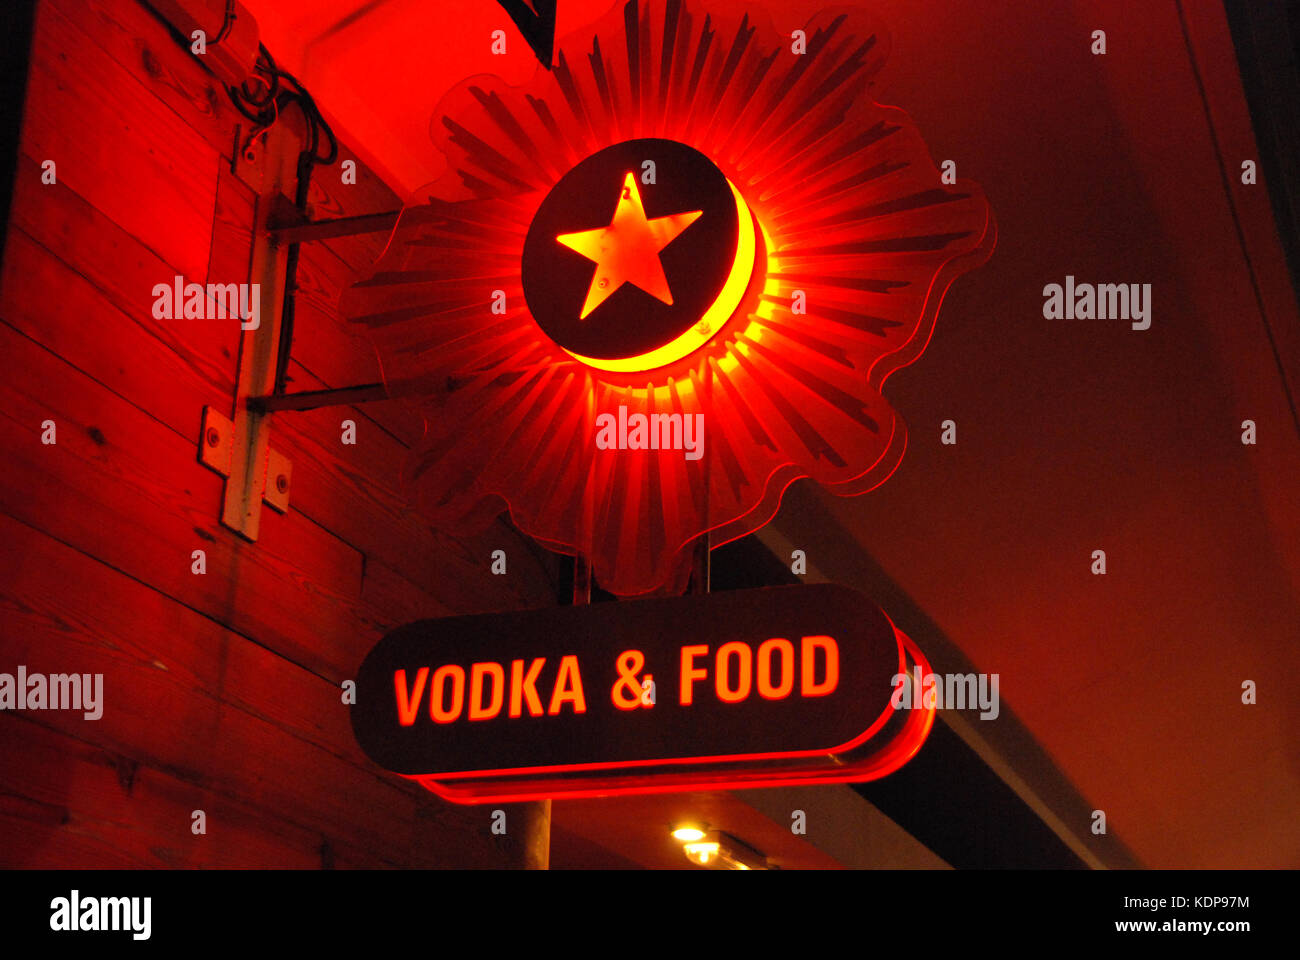 2000, close-up picture of a red, orange and yellow neon sign at night with a red star logo and the words 'Vodka & Food' in capital letters below it, London, England.  Both the red star and vodka are symbolic of the communist country Russia. Stock Photo